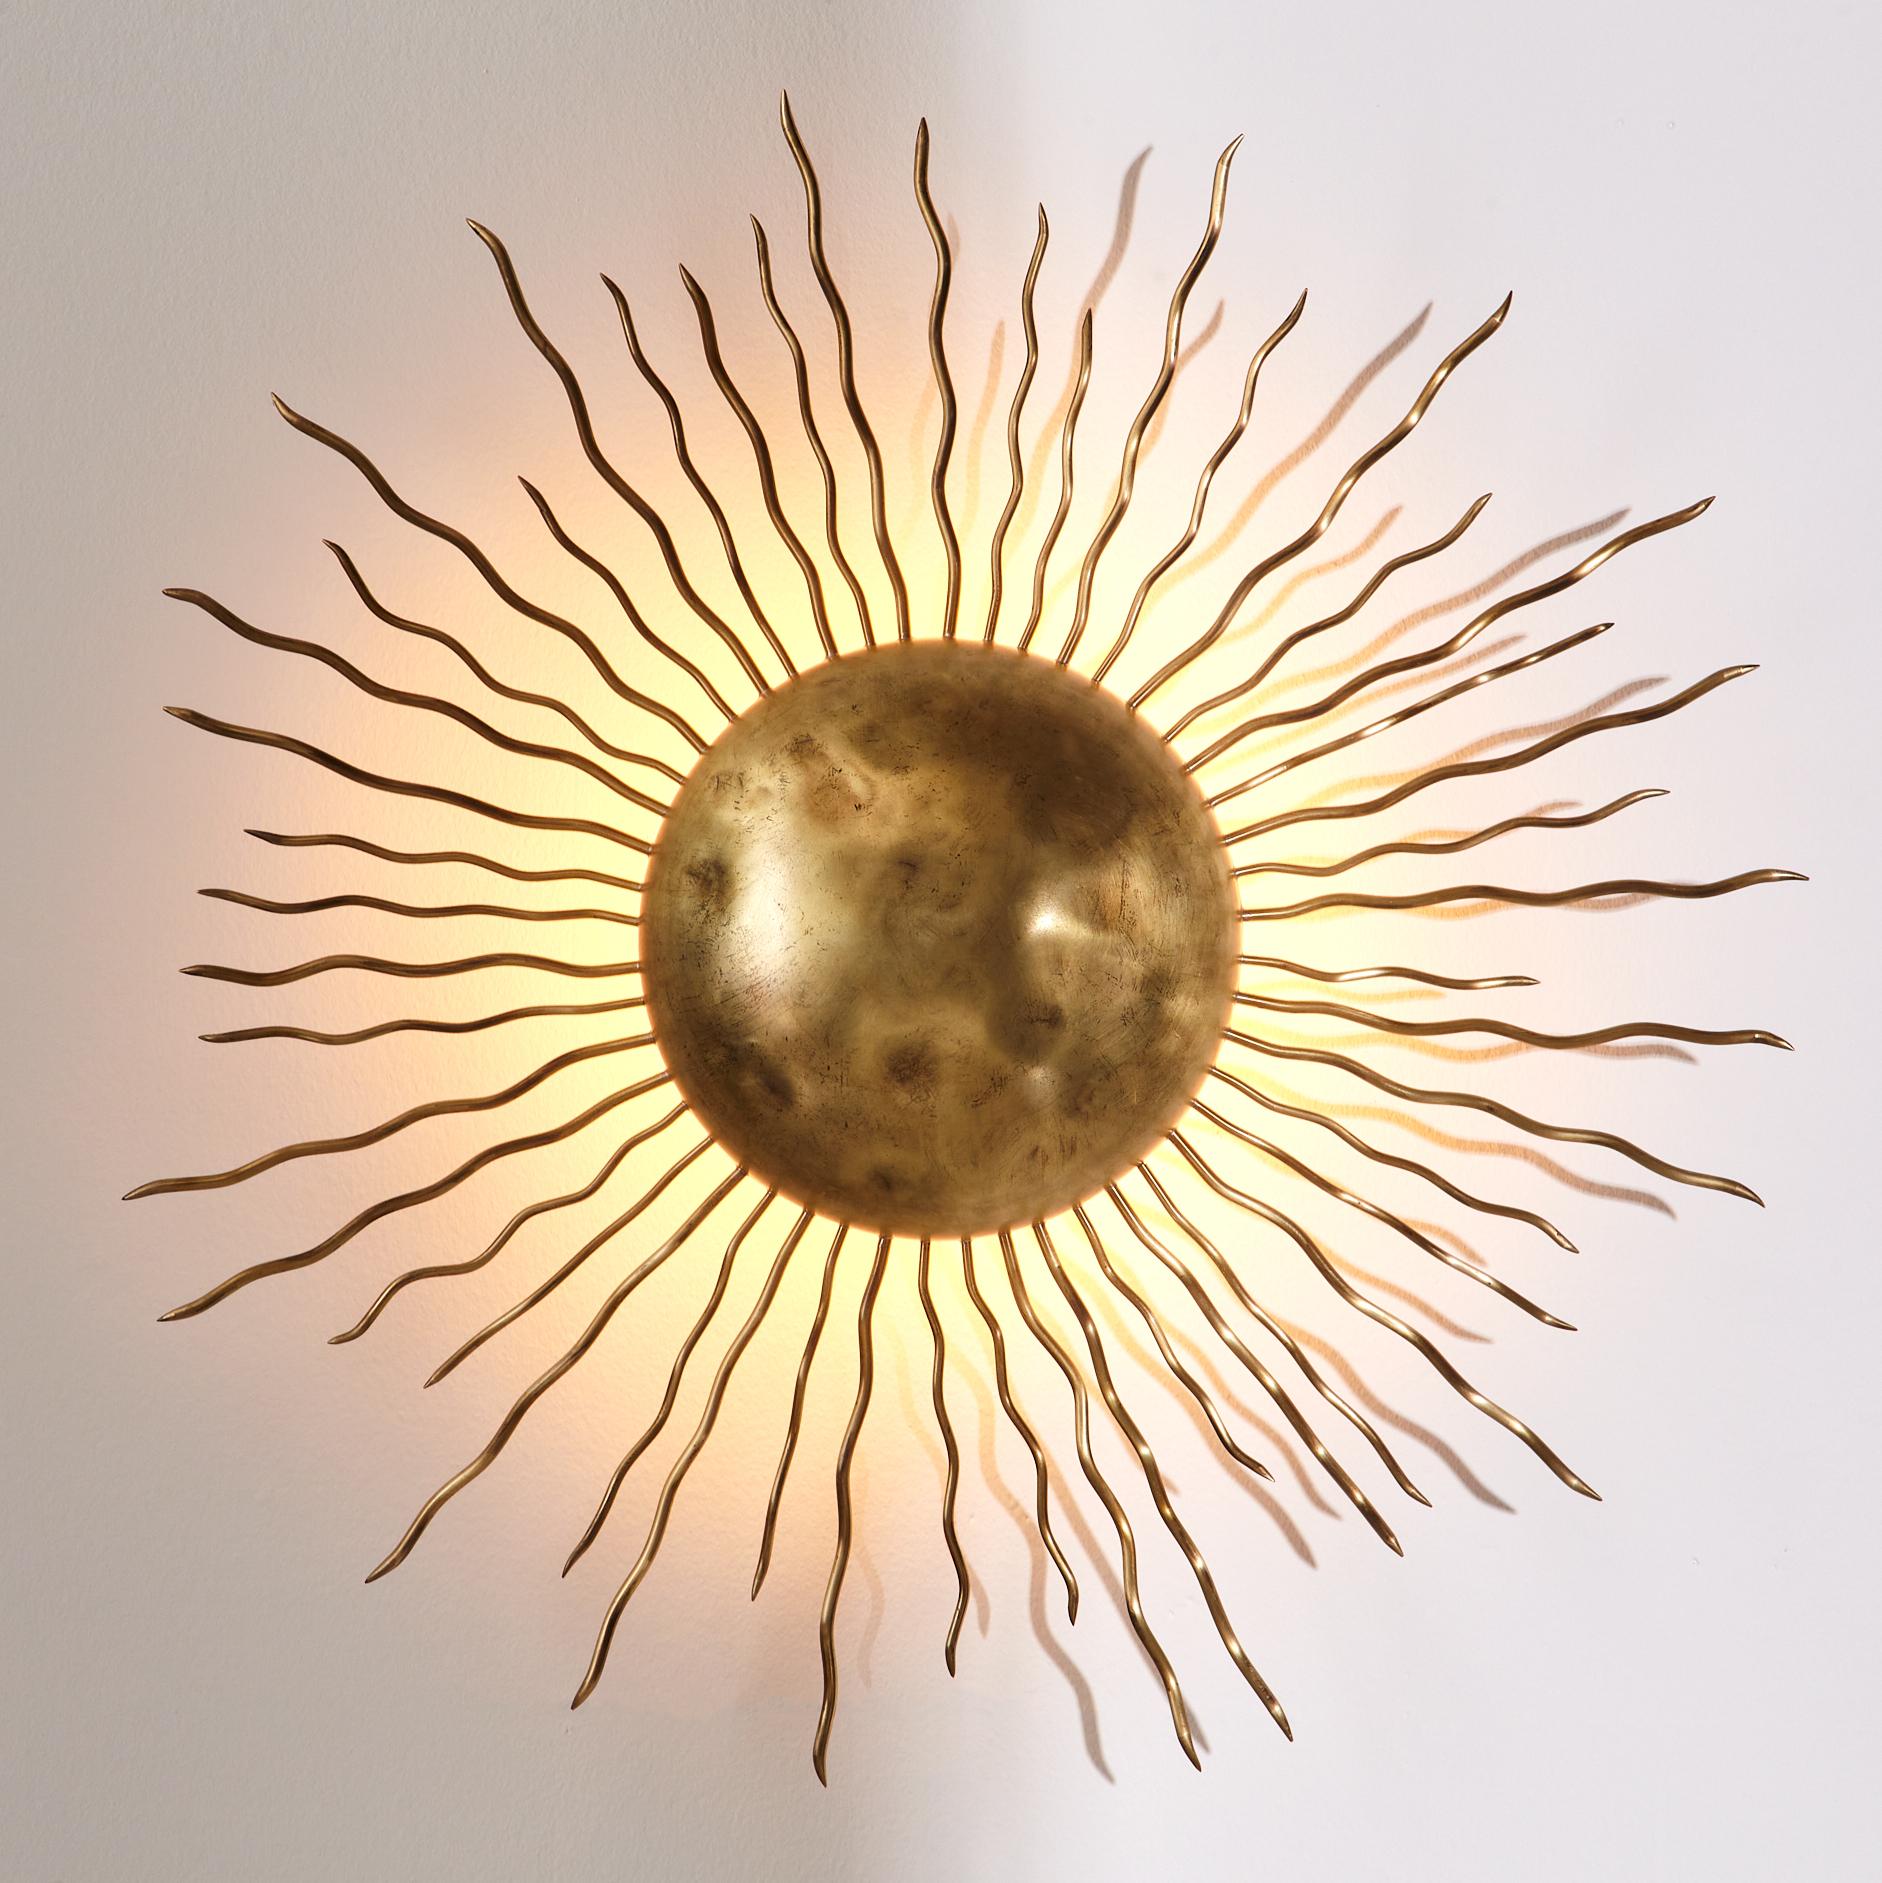 A little piece of jewellery for any space, inspired by a South African sunrise. It's flush positioning and brass body create a subtle burst of light that make the Sunburst a uniquely versatile fixture. Delicate, yet full of character.

Comes with a